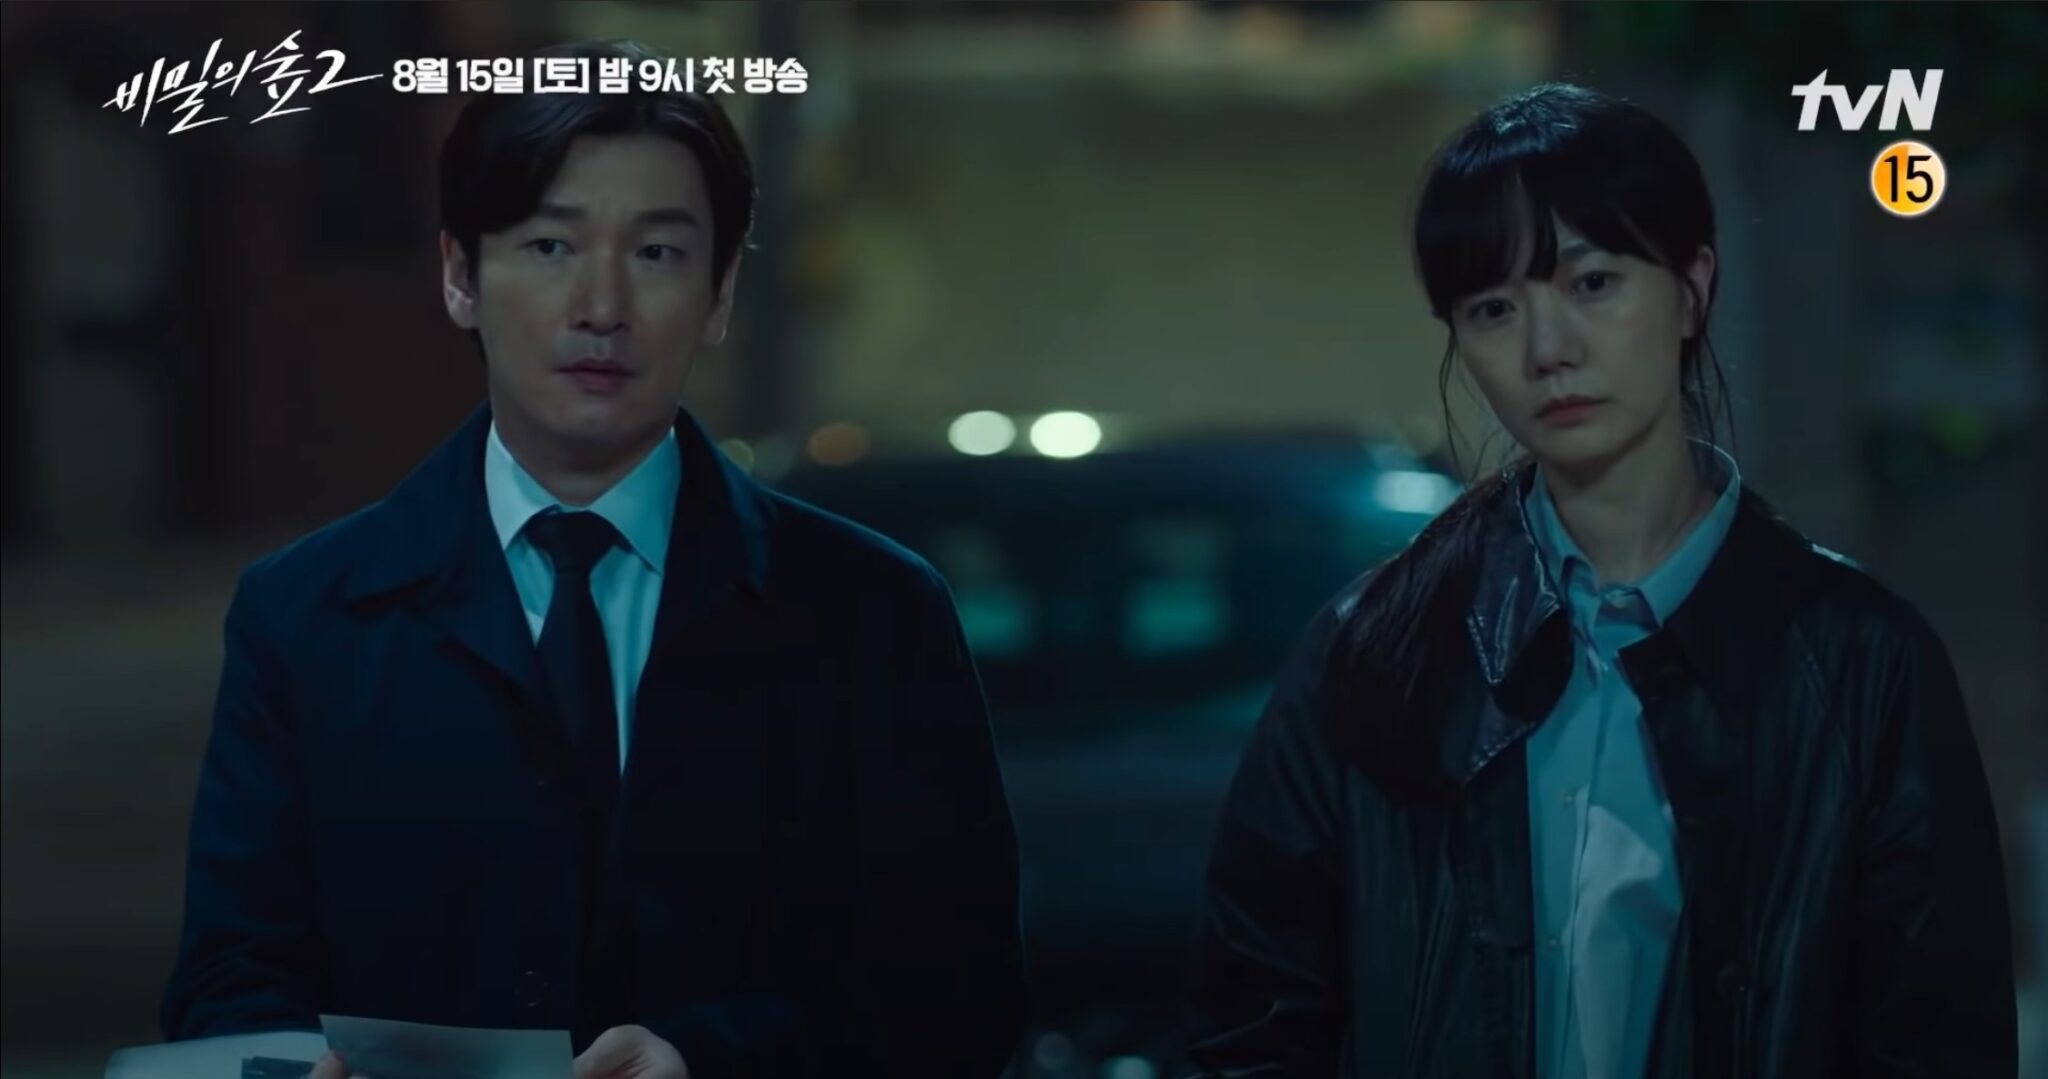 Jo Seung-woo, Bae Doo-na go head-to-head in new teaser for Forest of Secrets 2